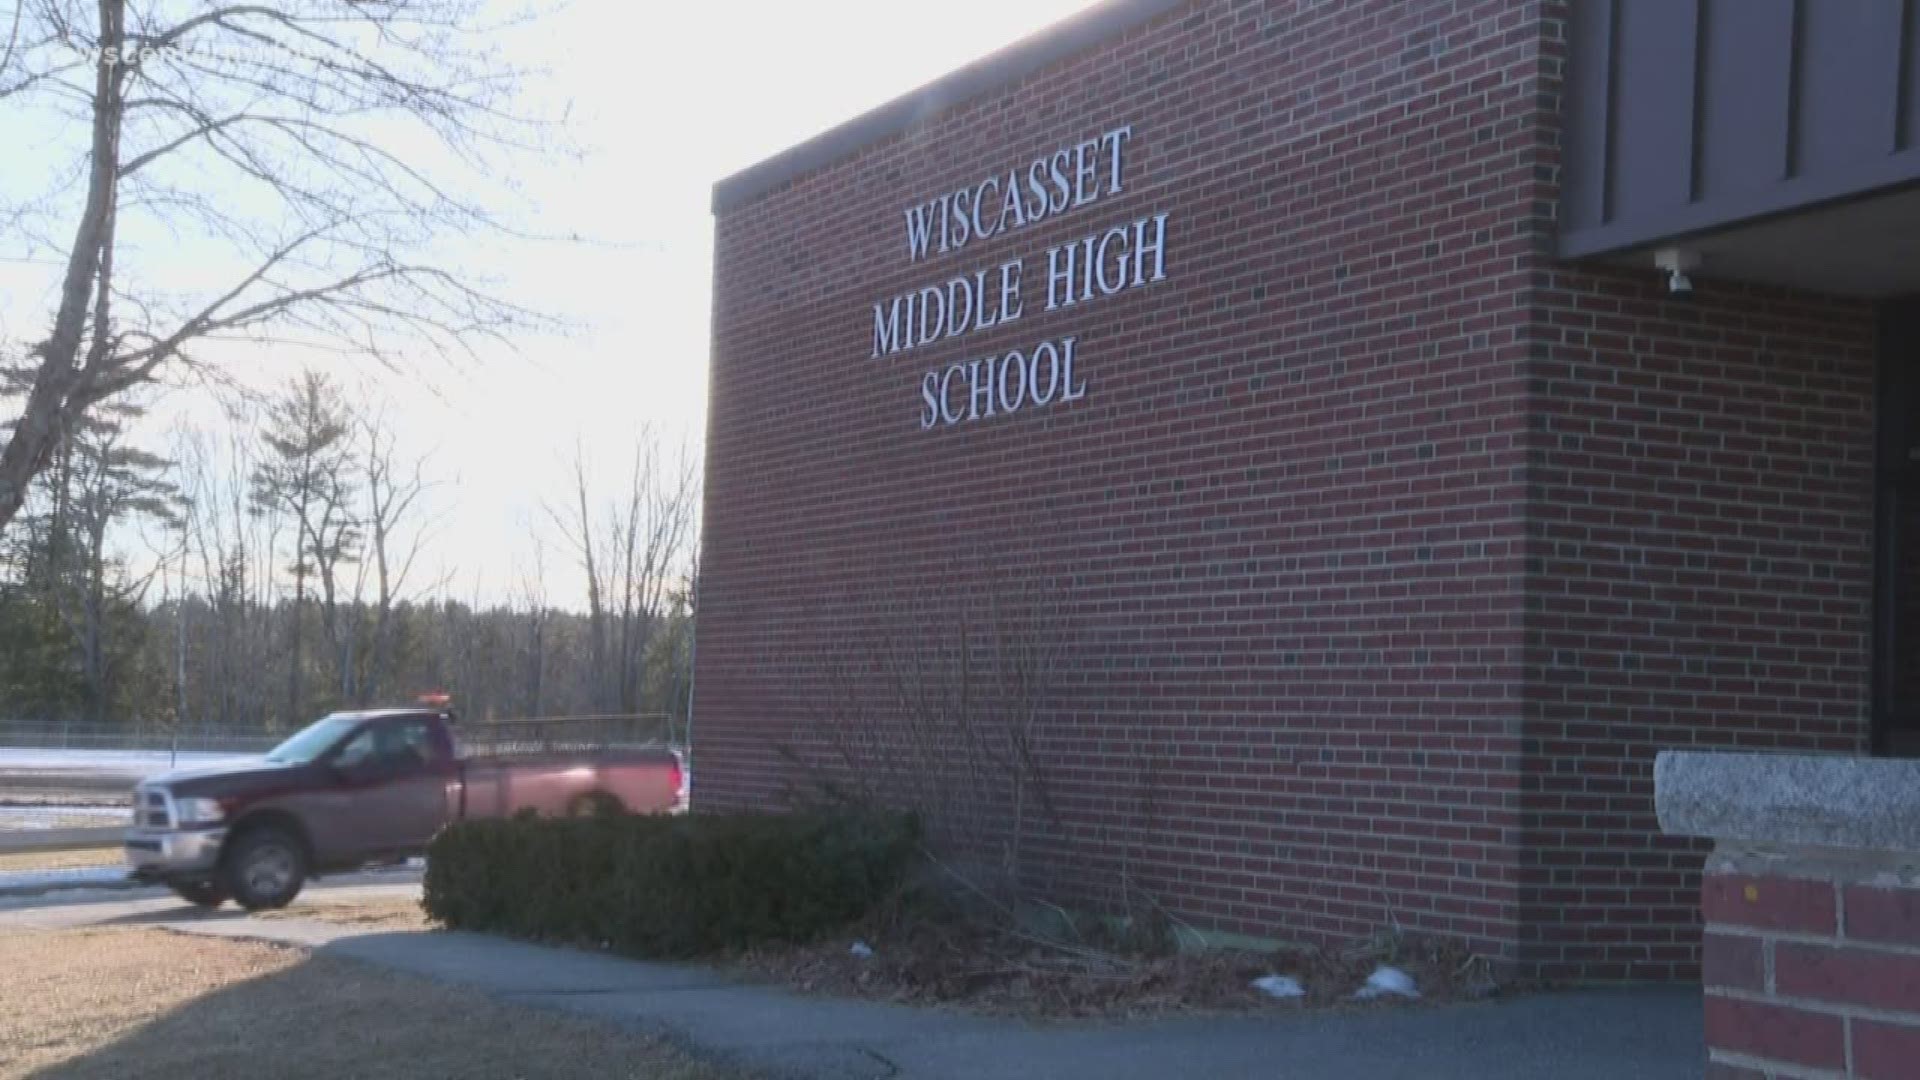 Teachers at Wiscasset Middle High School saw a need and decided to do something about it – not in secret, but right out in the open.